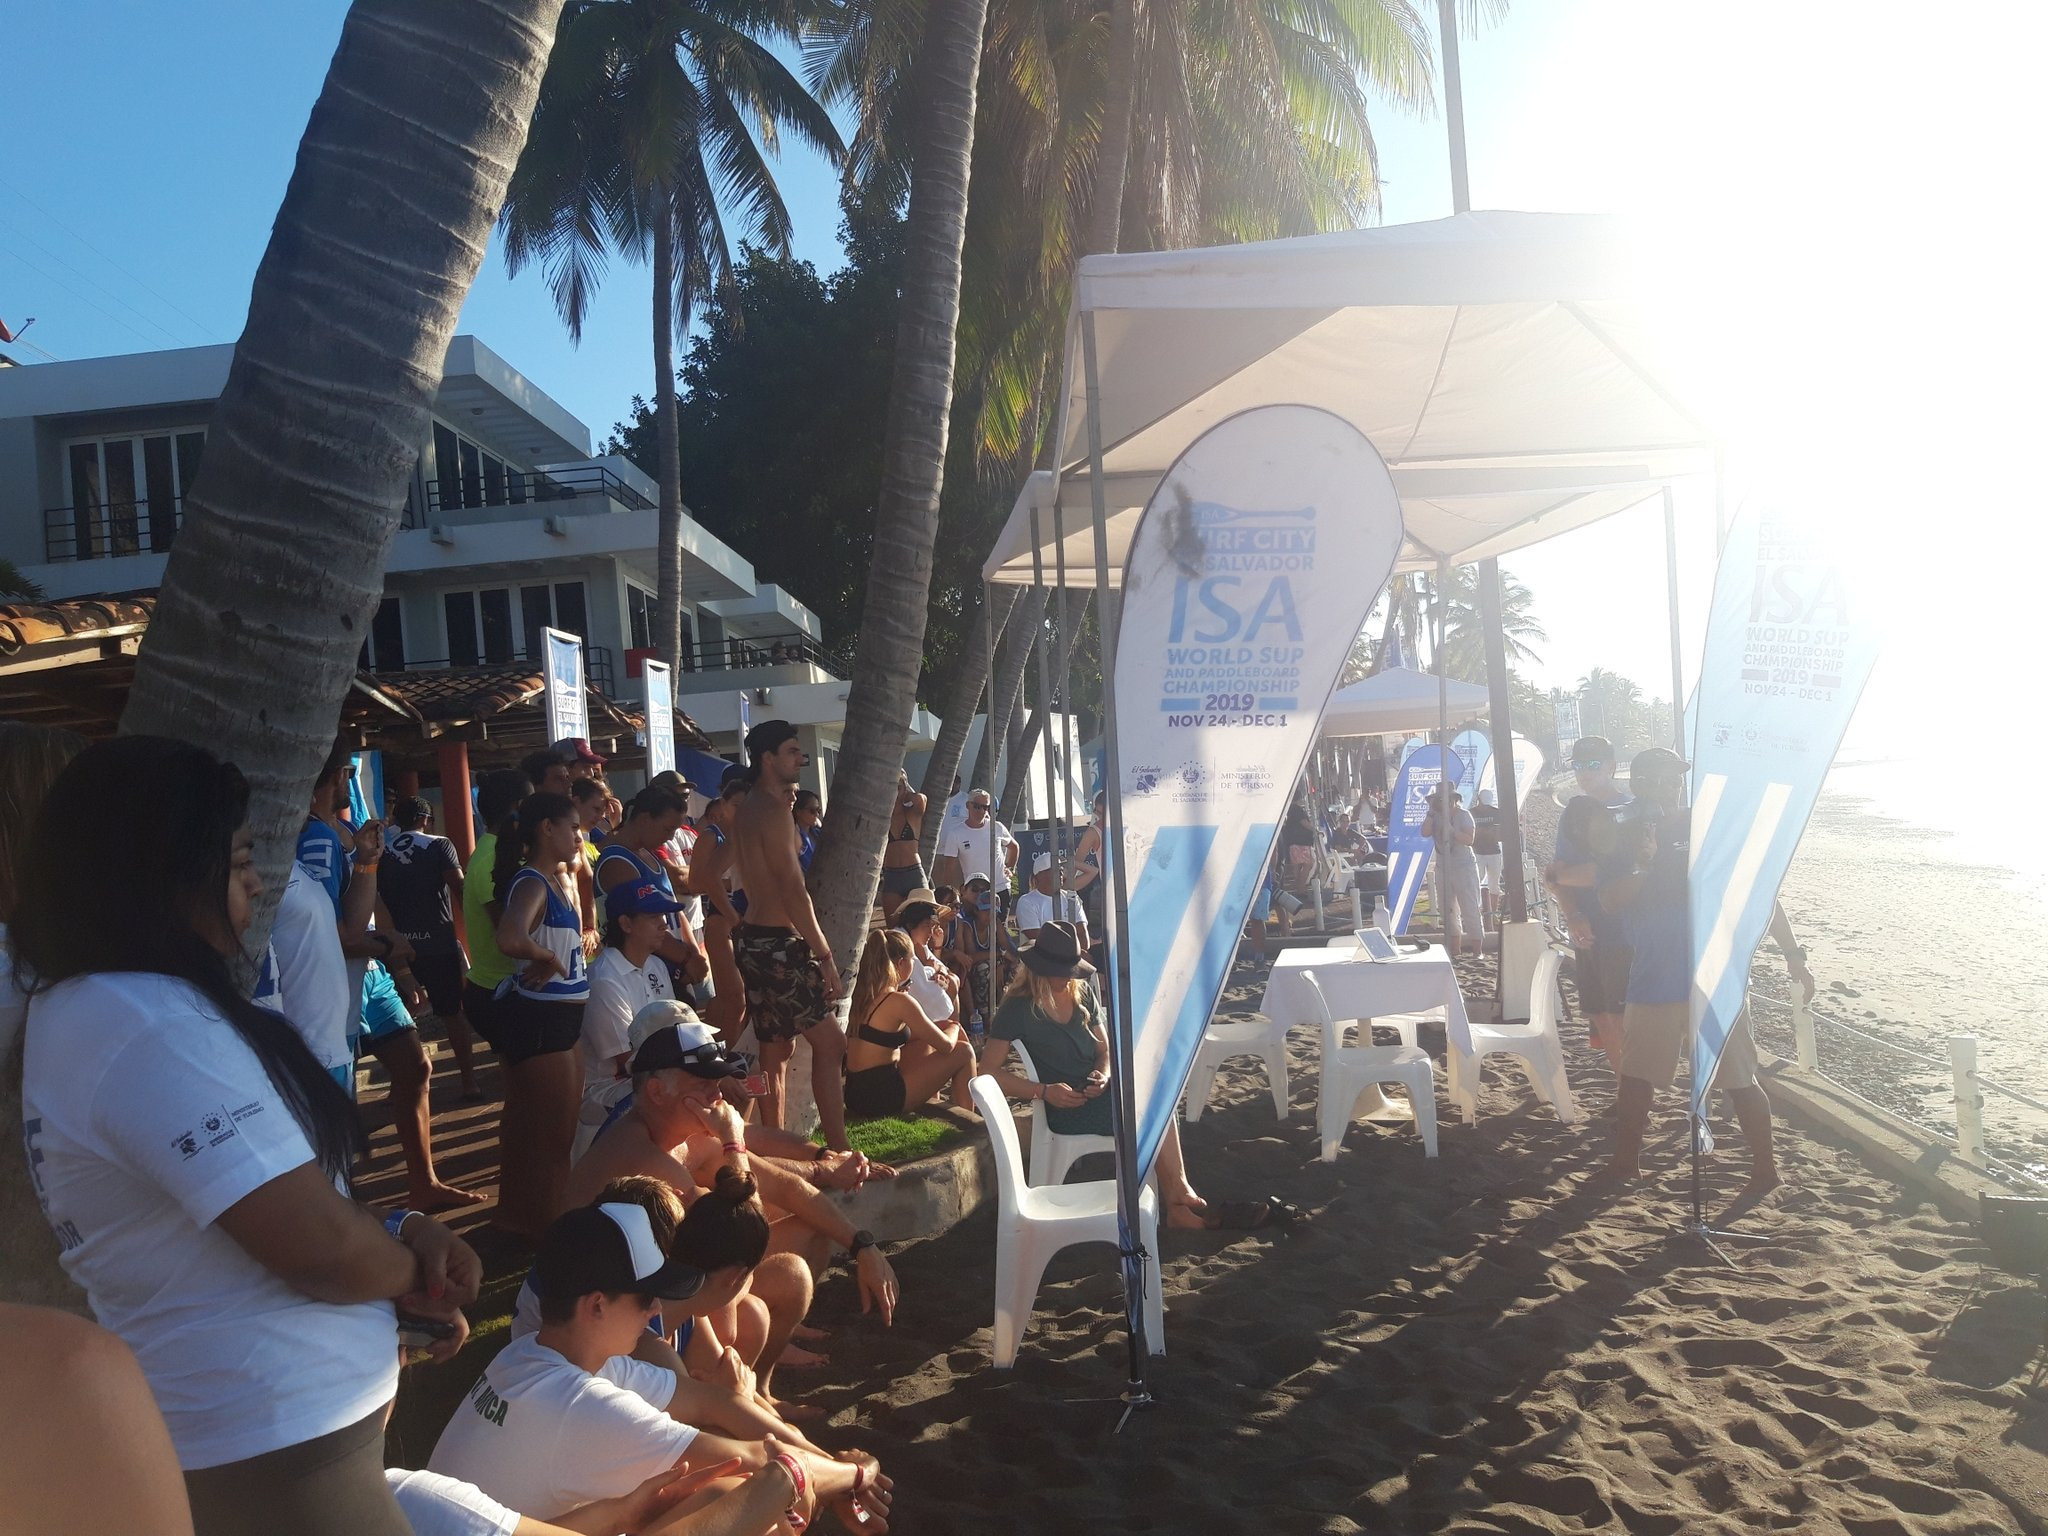 ISA race director Anthony Vela gives a pre-race briefing as the sun rises at El Sunzal beach ©ISA 